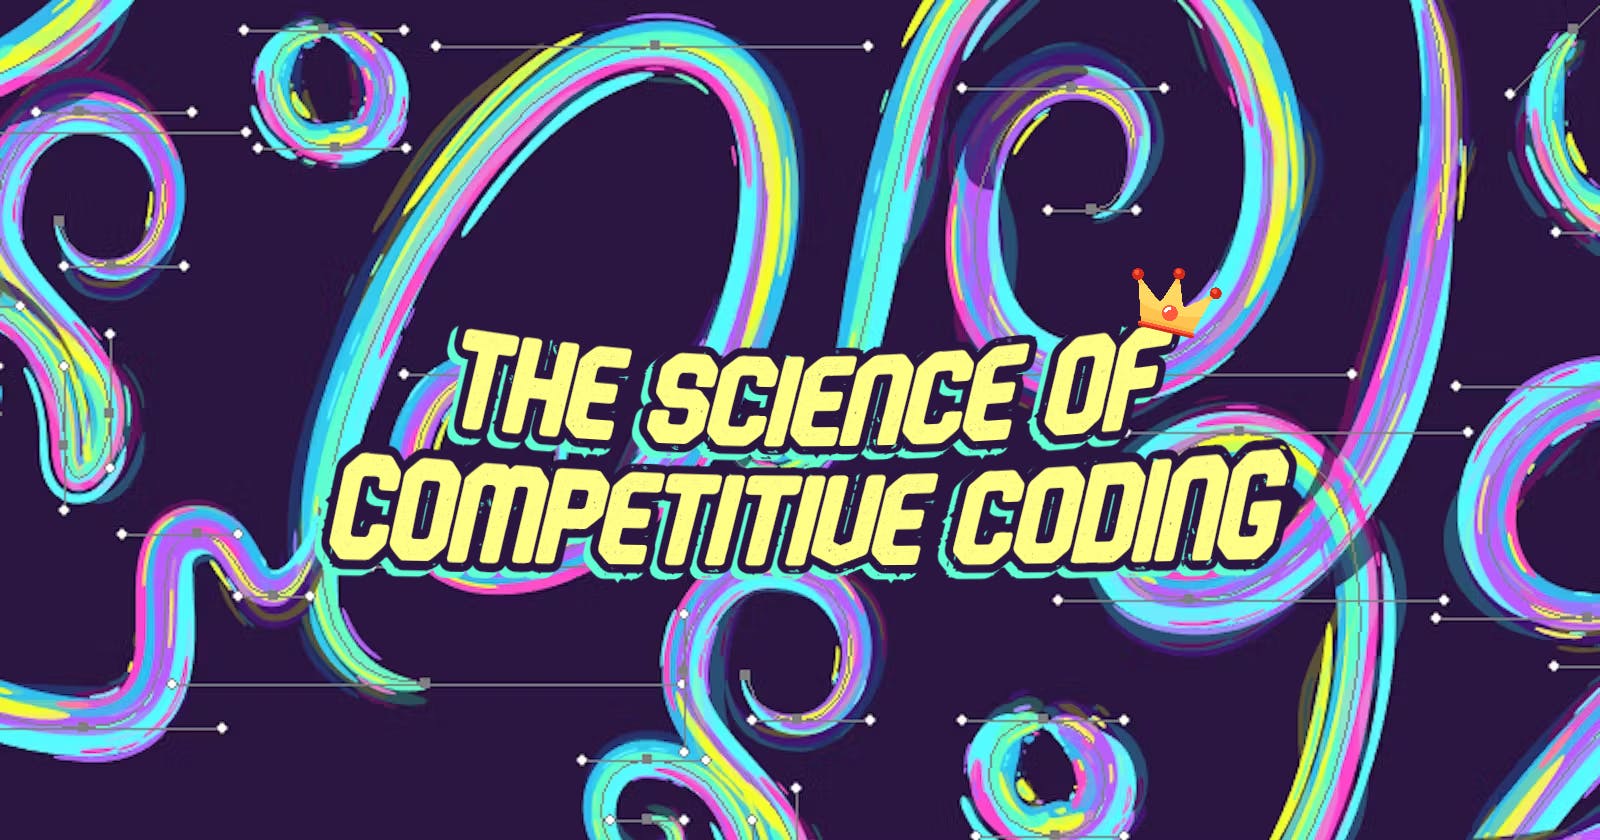 The Science of Competitive Coding